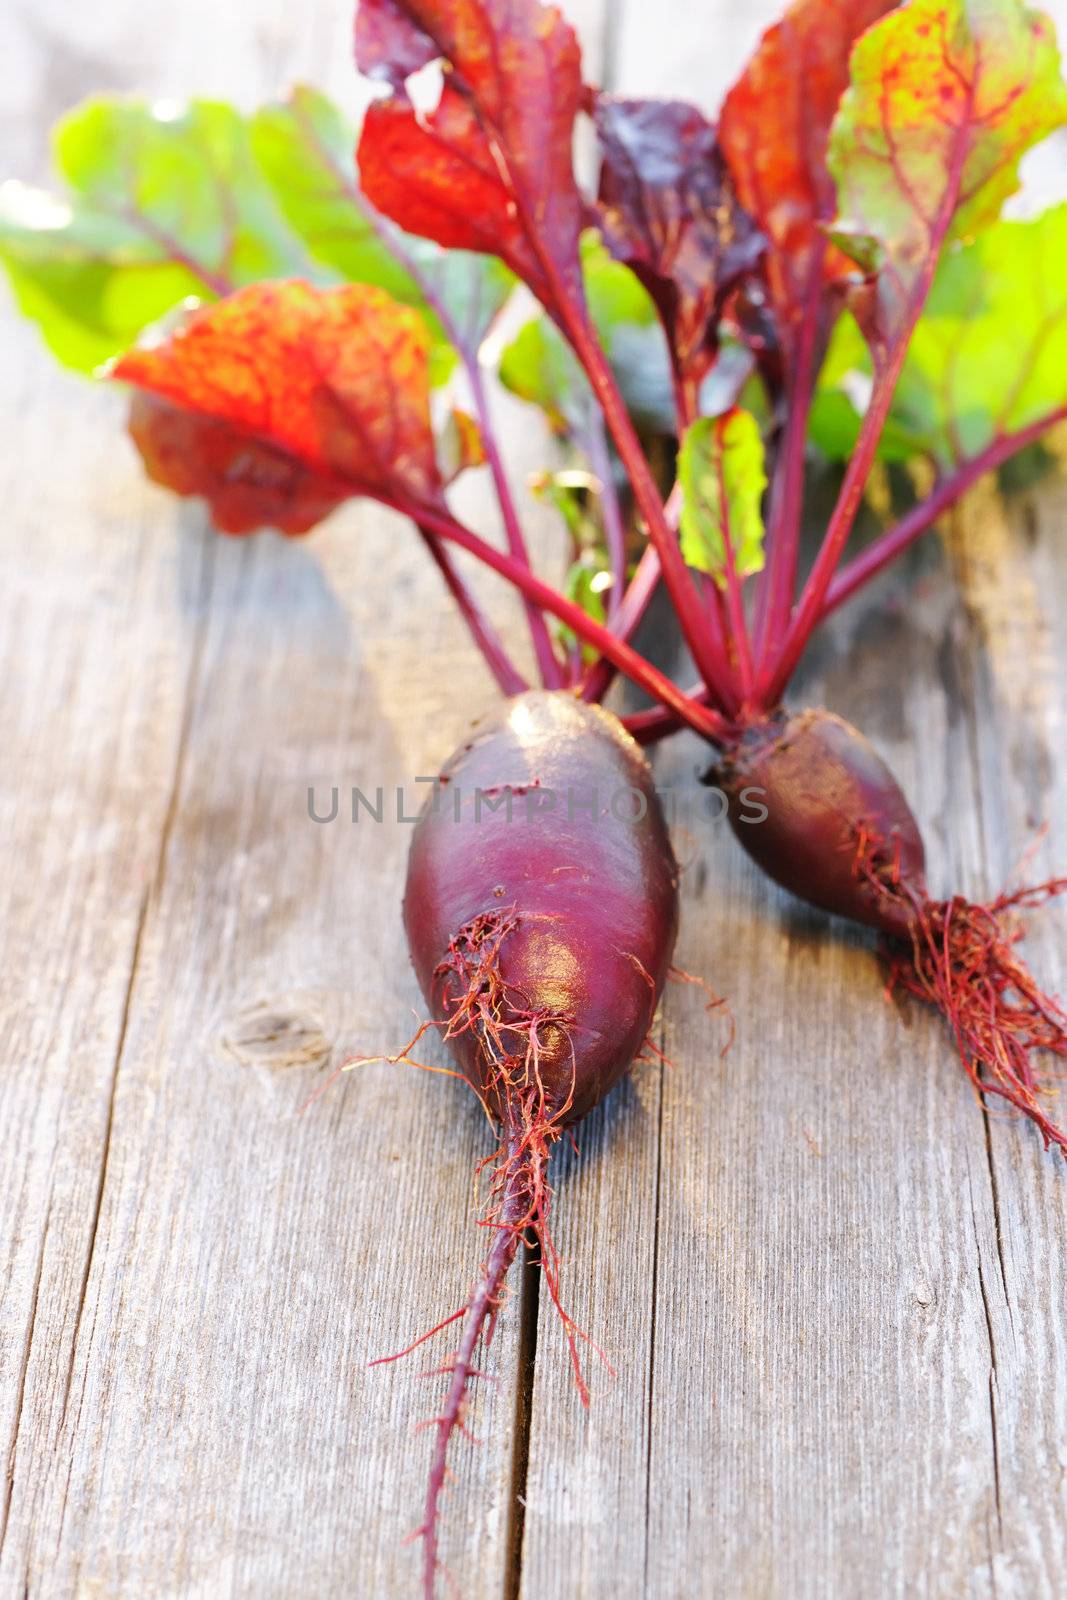 Beetroot on wooden table by haveseen